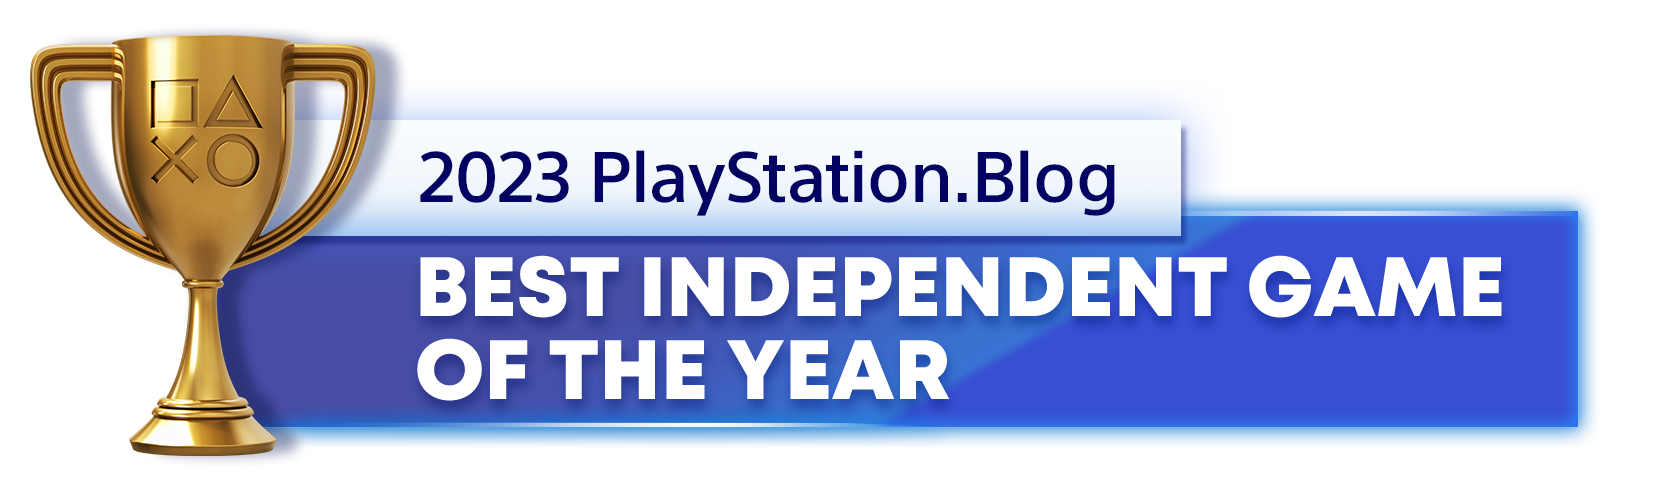  "Gold Trophy for the 2023 PlayStation Blog Best Independent Game of the Year Winner"